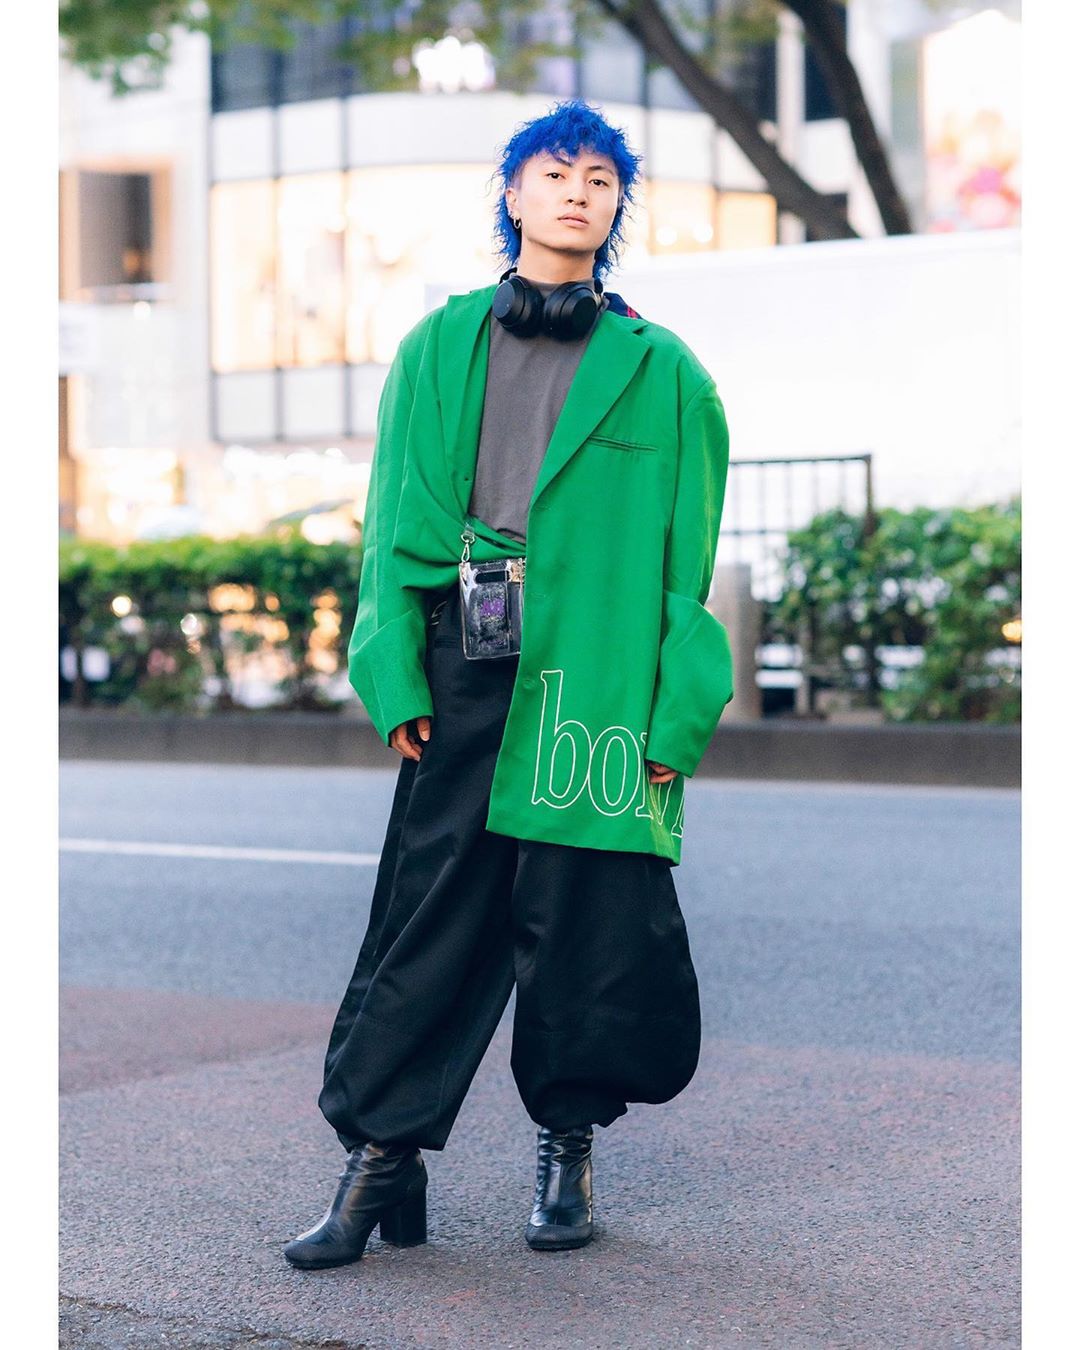 Tokyo Fashion: 18-year-old Japanese beauty school student Yuito ...